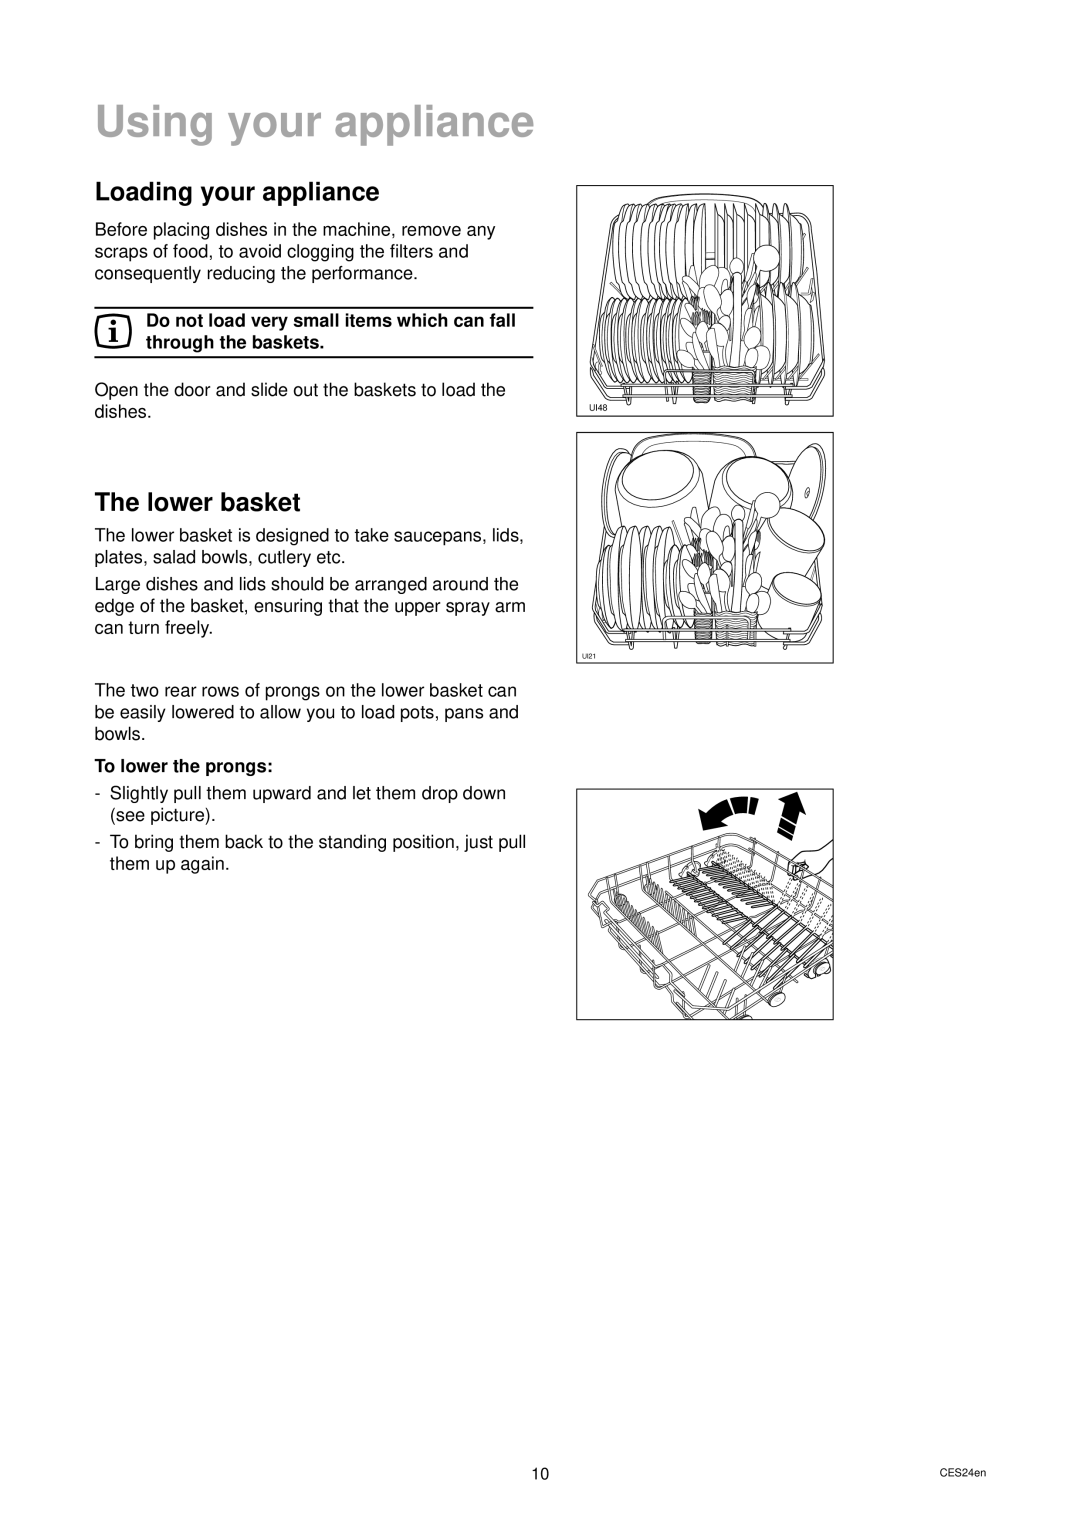 Zanussi ZDS 699 EX manual Using your appliance, Loading your appliance, Lower basket, To lower the prongs 